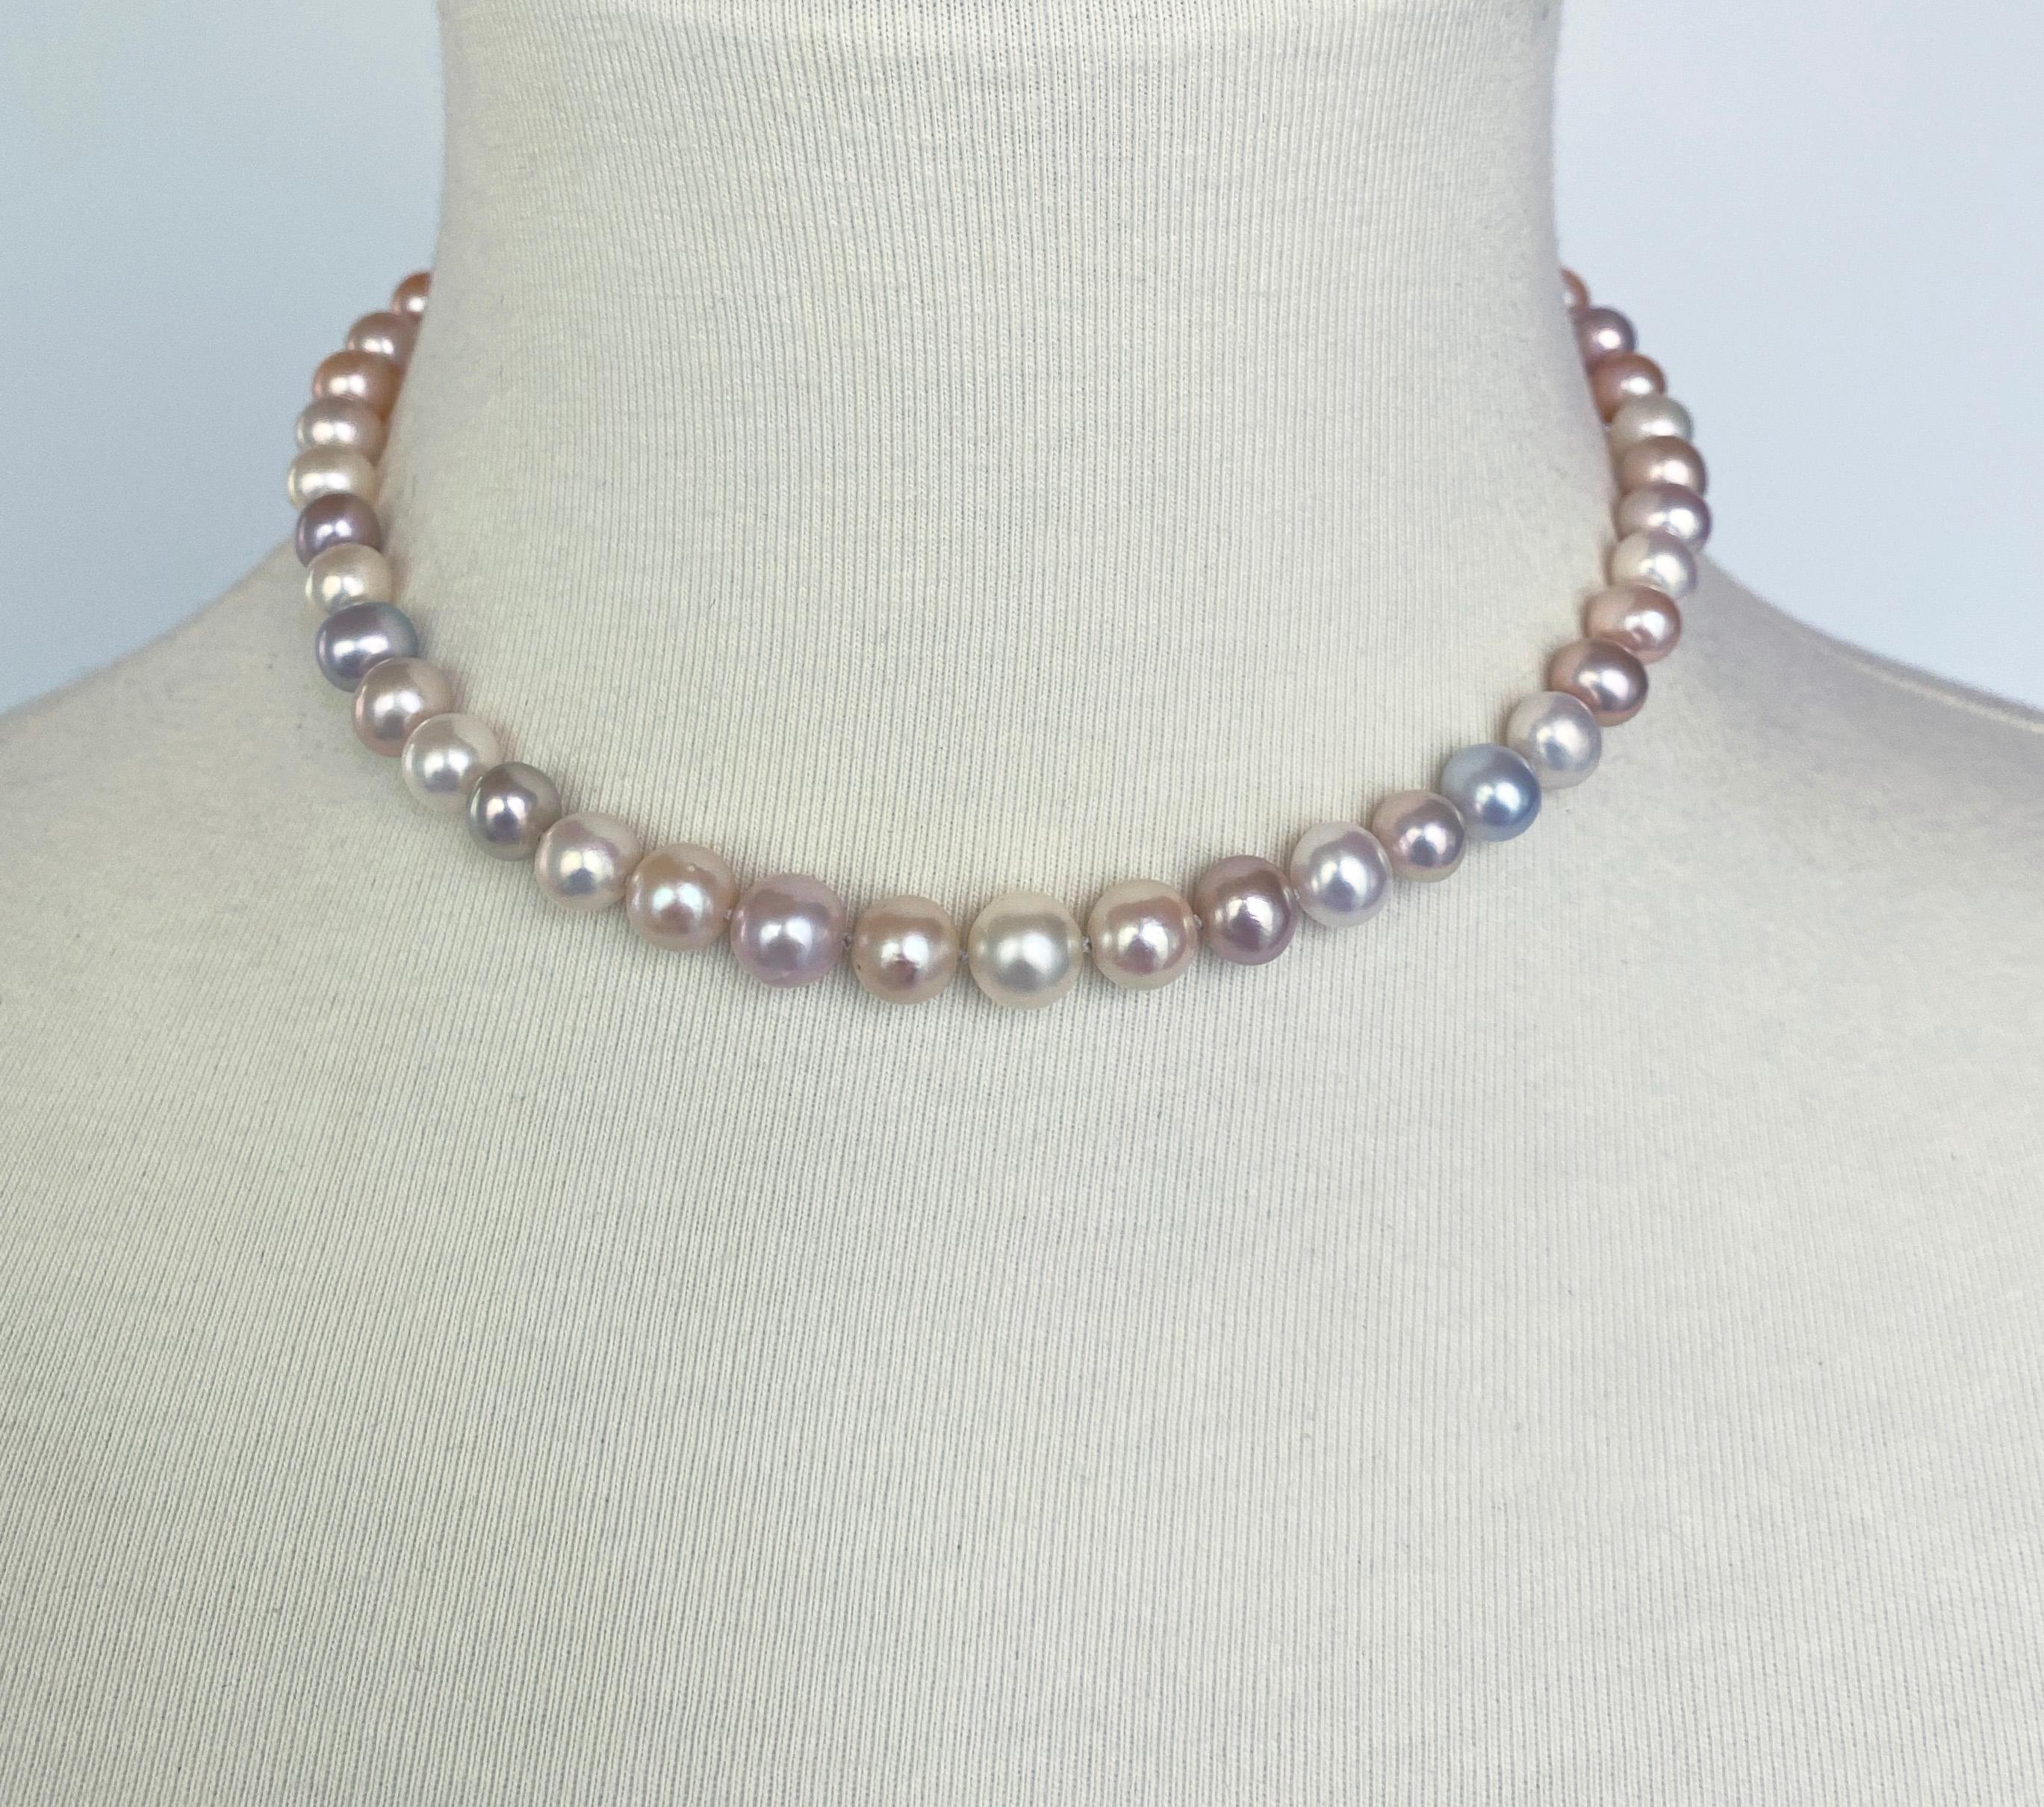 Some like it simple! Inspired by 1950s debutantes, This beautiful multi colored Pearl necklace features slightly graduated high luster Pearls displaying pink, blue, purple, green and yellow undertones. Double knotted, this necklace features a